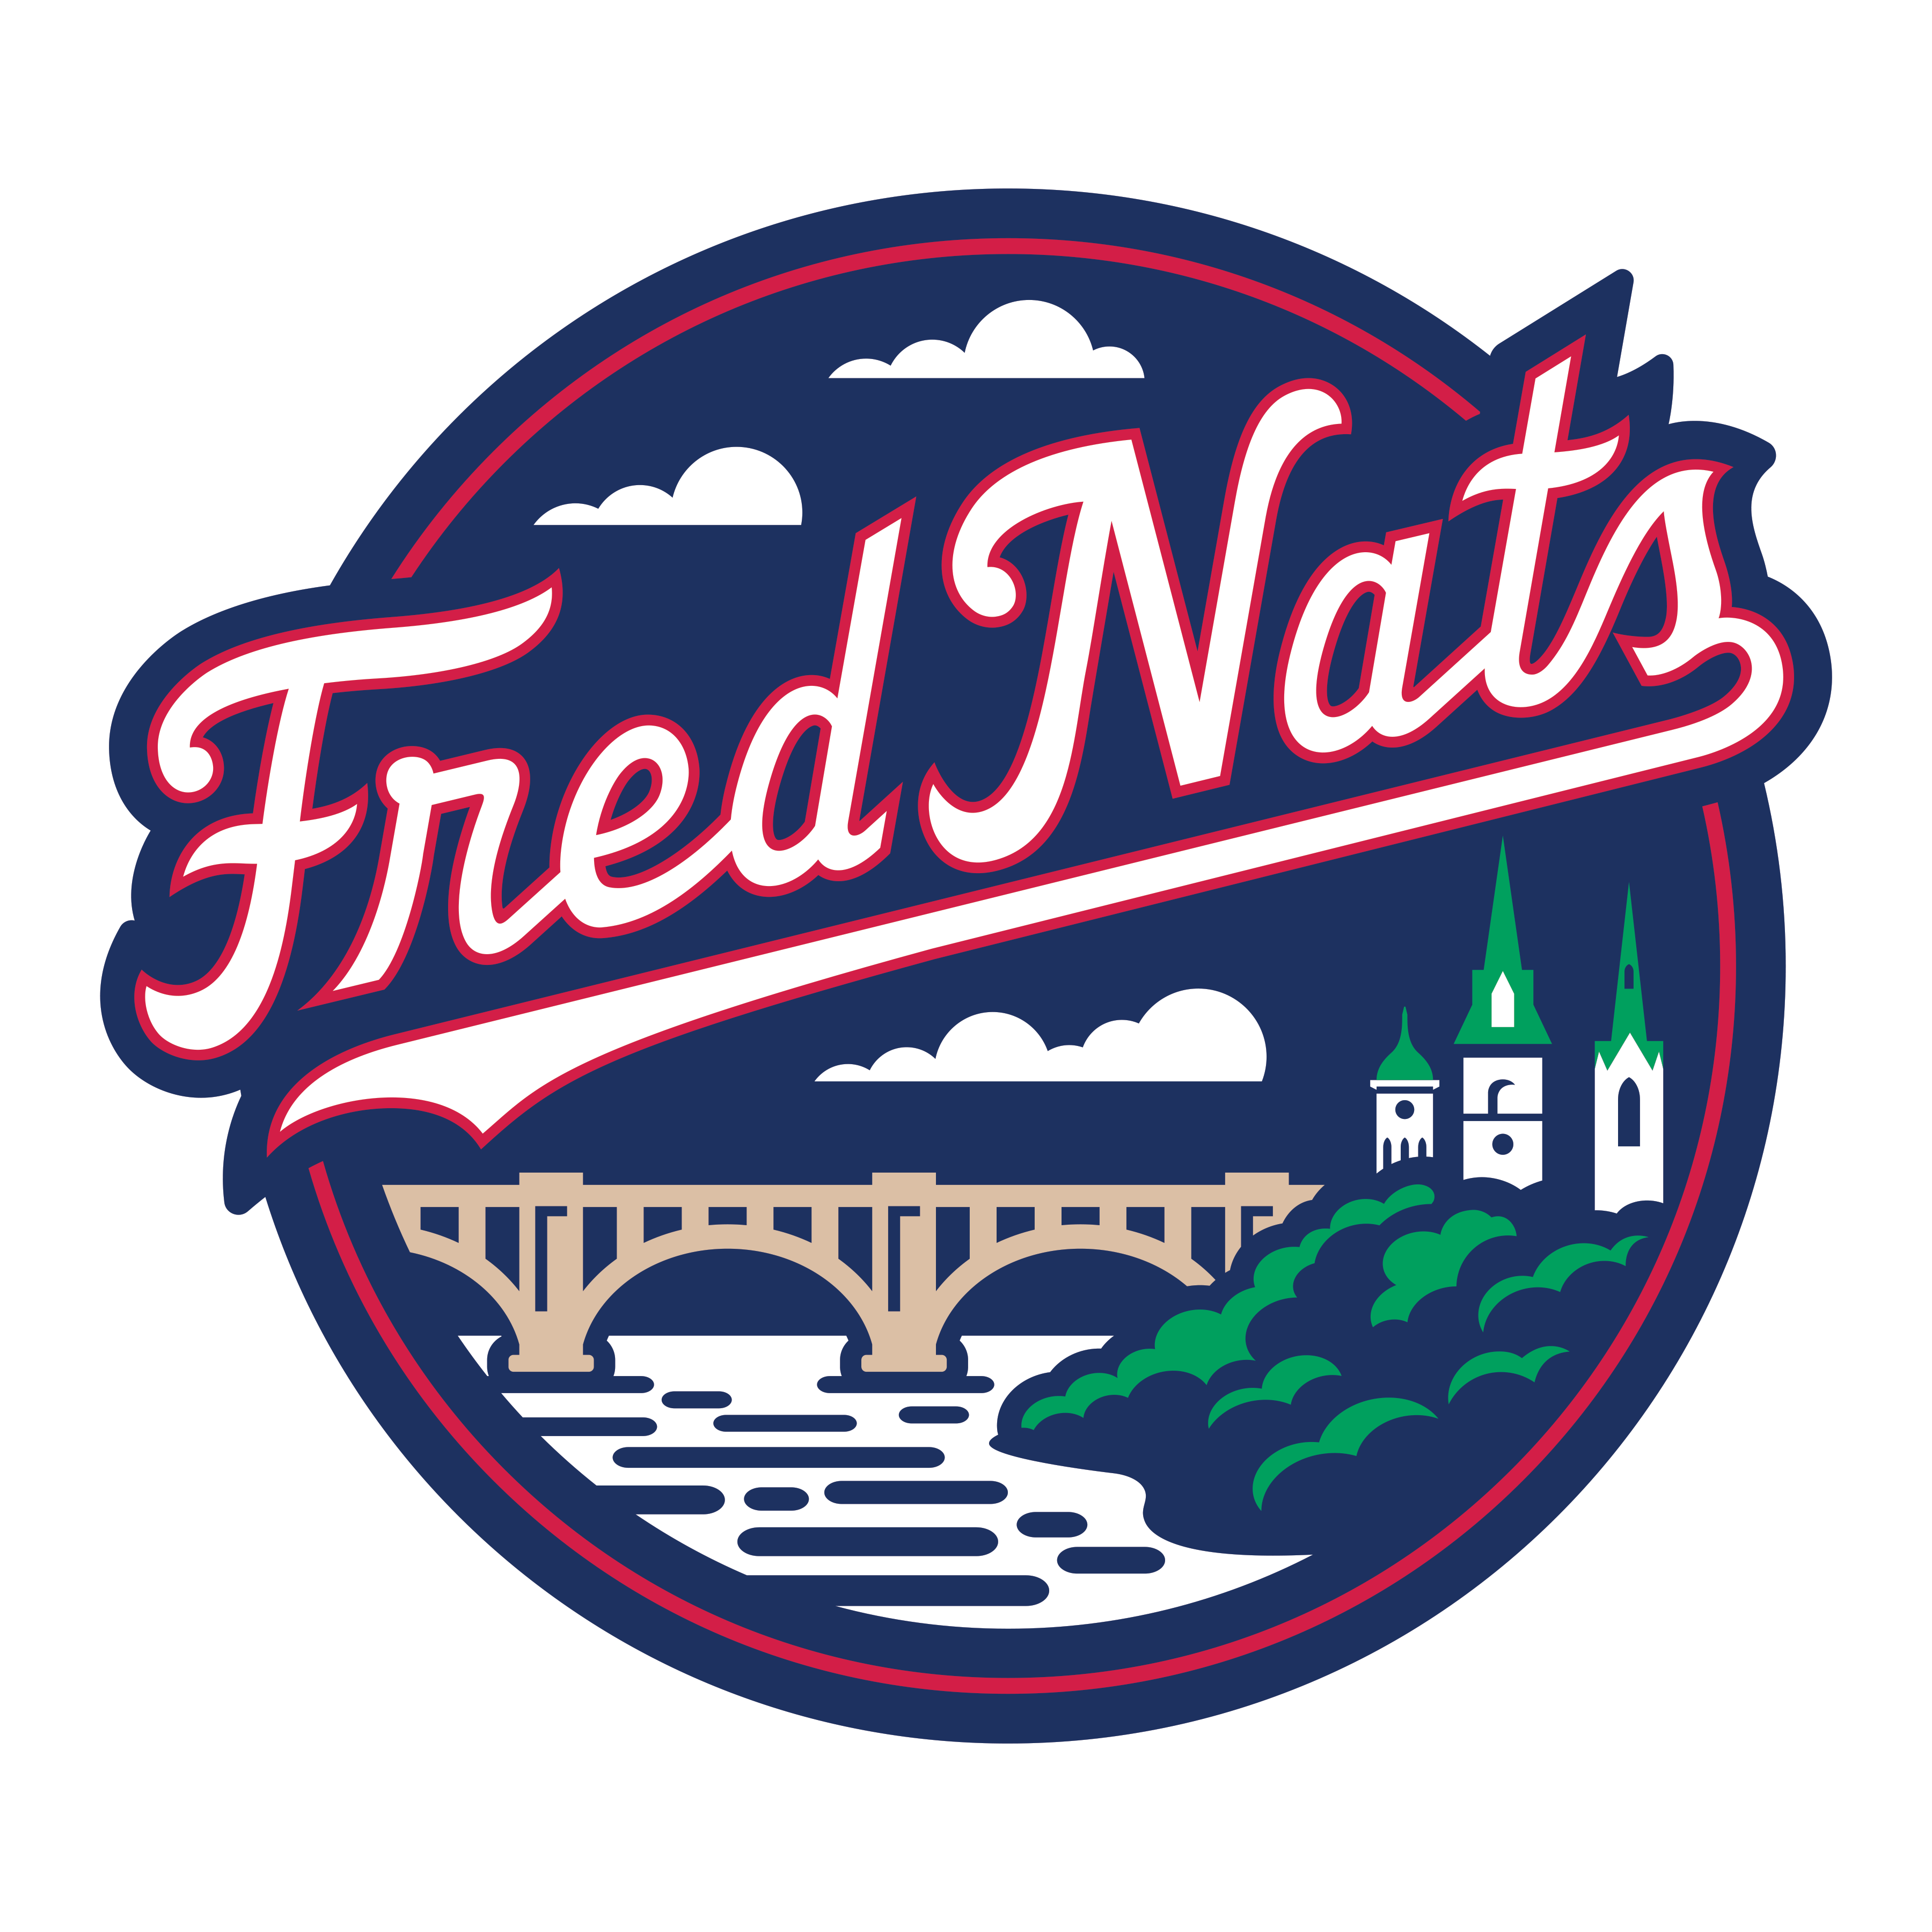 FredNats announce 2020 promotional schedule